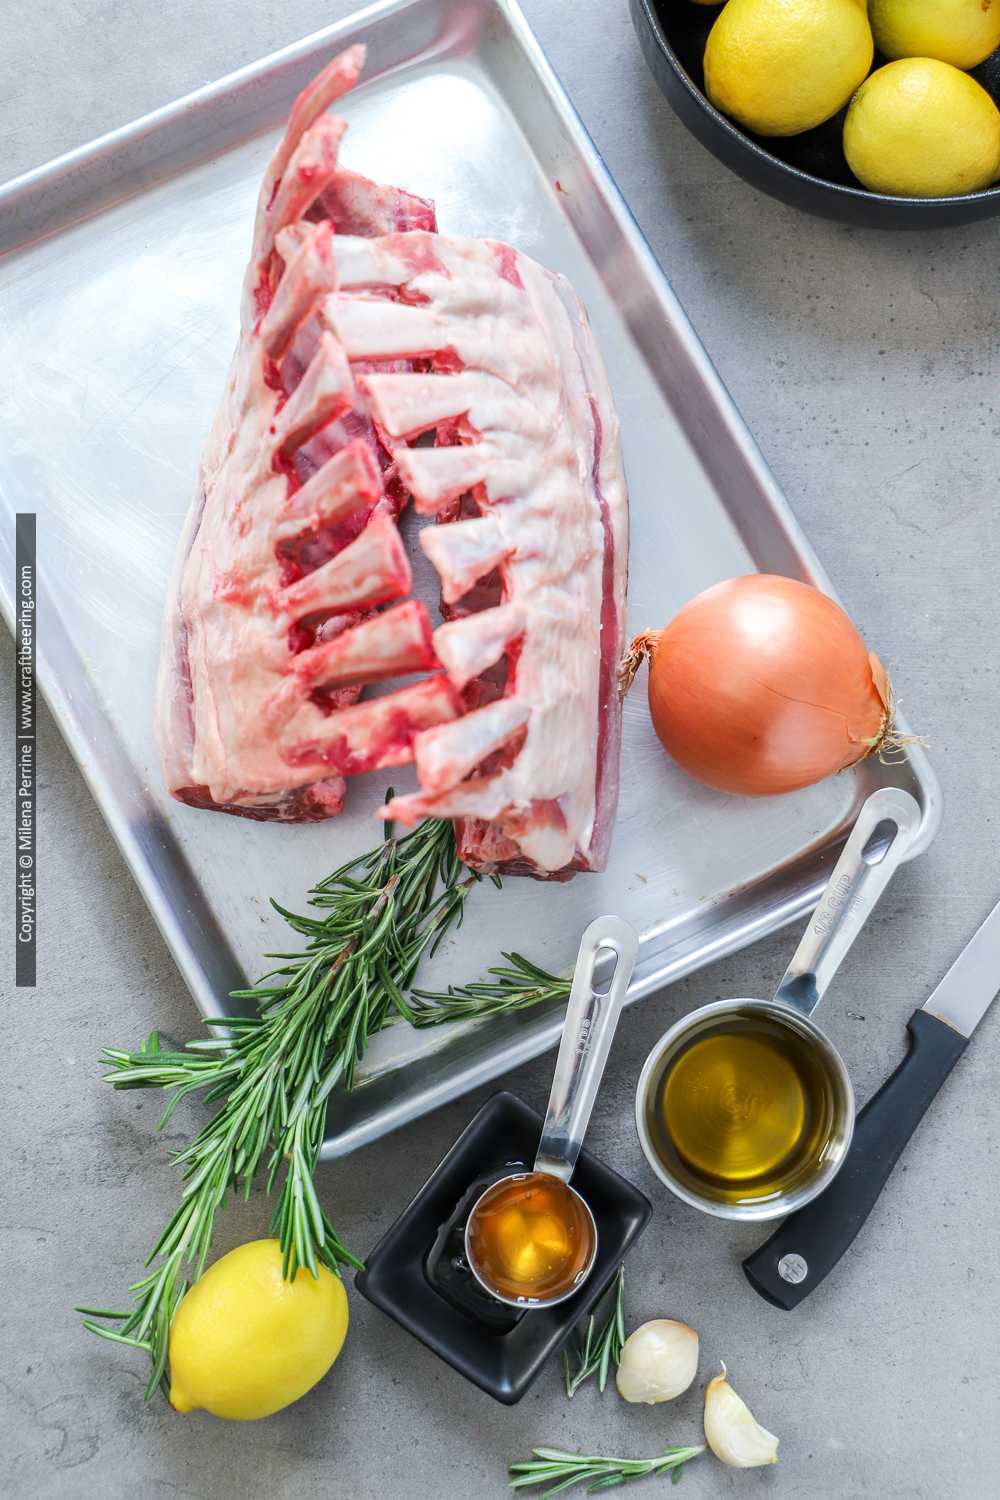 Raw racks of lamb with ingredients for rosemary marinade.